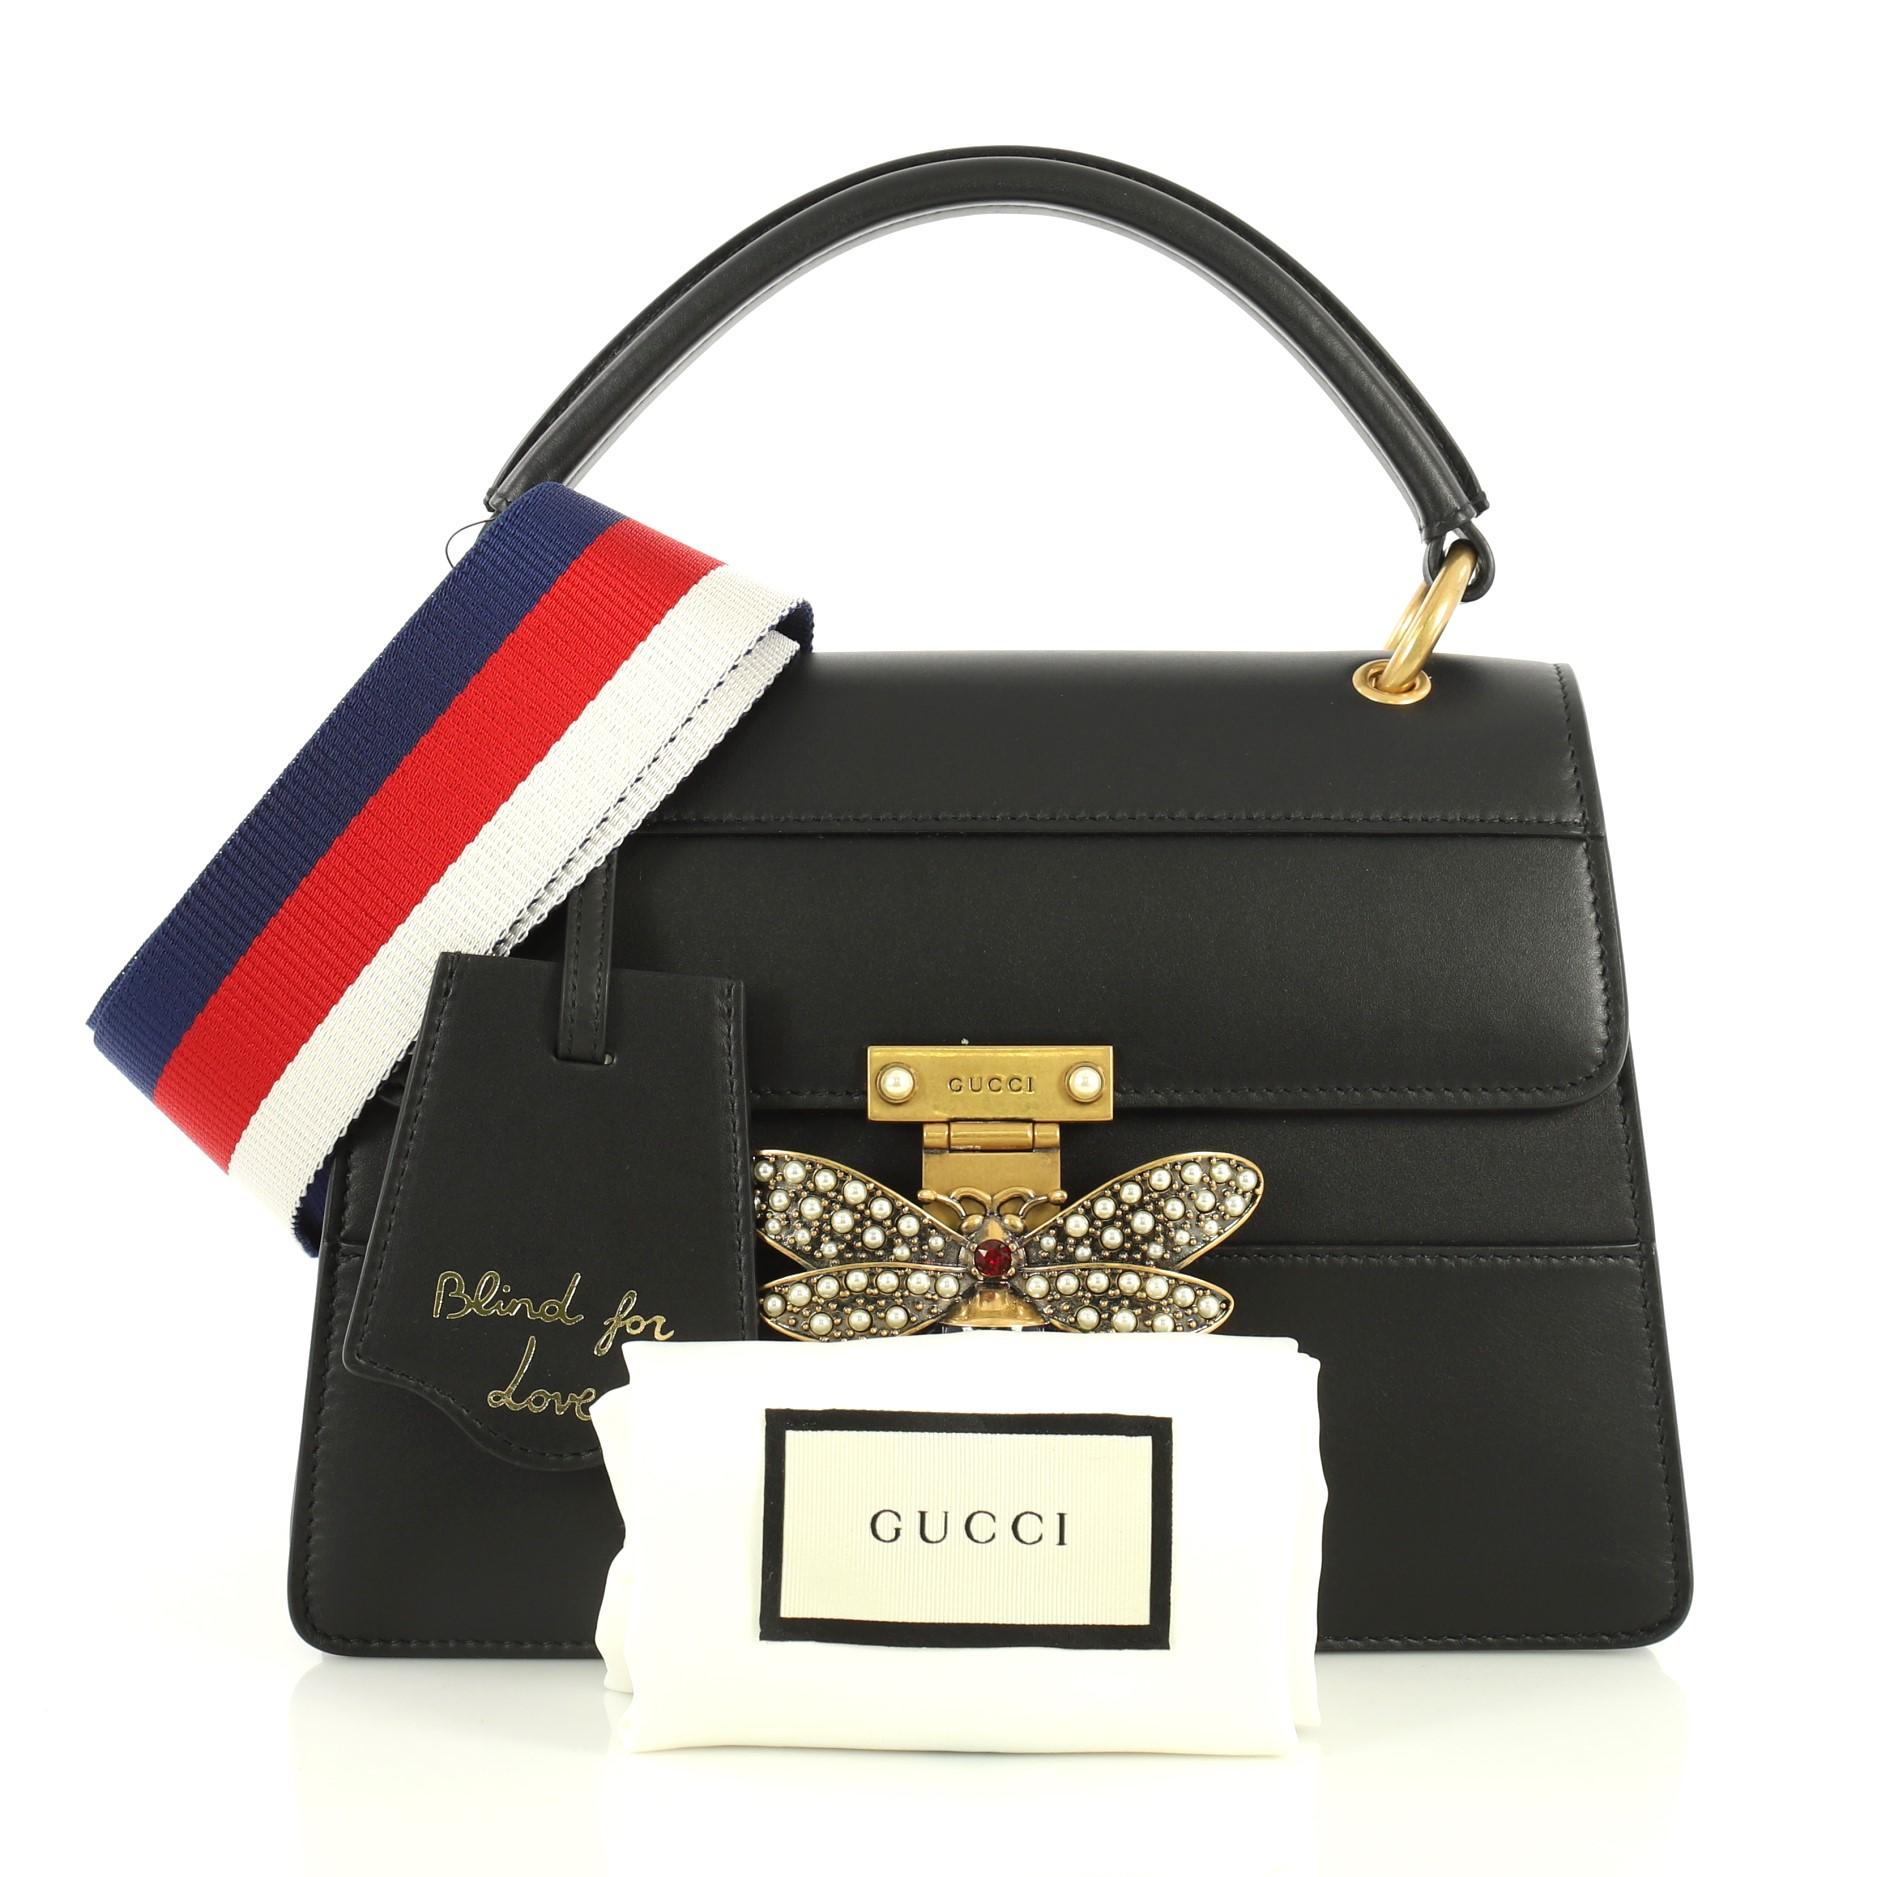 This Gucci Queen Margaret Top Handle Bag Leather Small, crafted from black leather, features a leather top handle, bejeweled bee on its flap, and aged gold-tone hardware. It opens to a neutral microfiber interior with three compartments and side